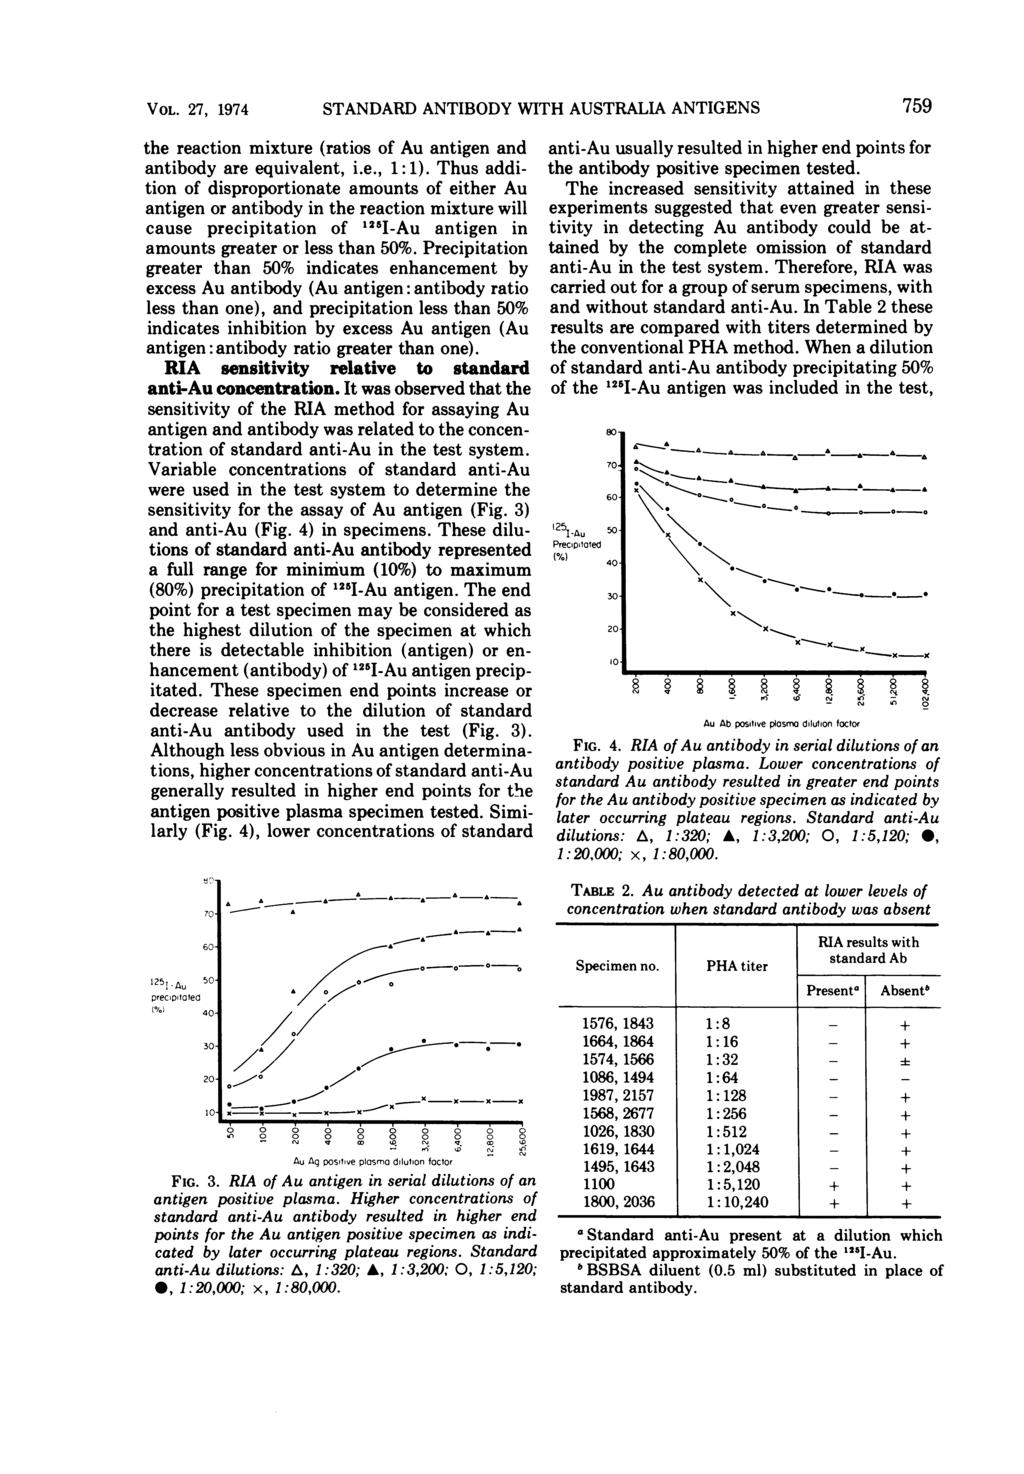 \; * -O VOL. 27, 1974 STANDARD ANTIBODY WITH AUSTRALIA ANTIGENS 759 the reaction mixture (ratios of Au antigen and anti-au usually resulted in higher end points for antibody are equivalent, i.e., 1:1).